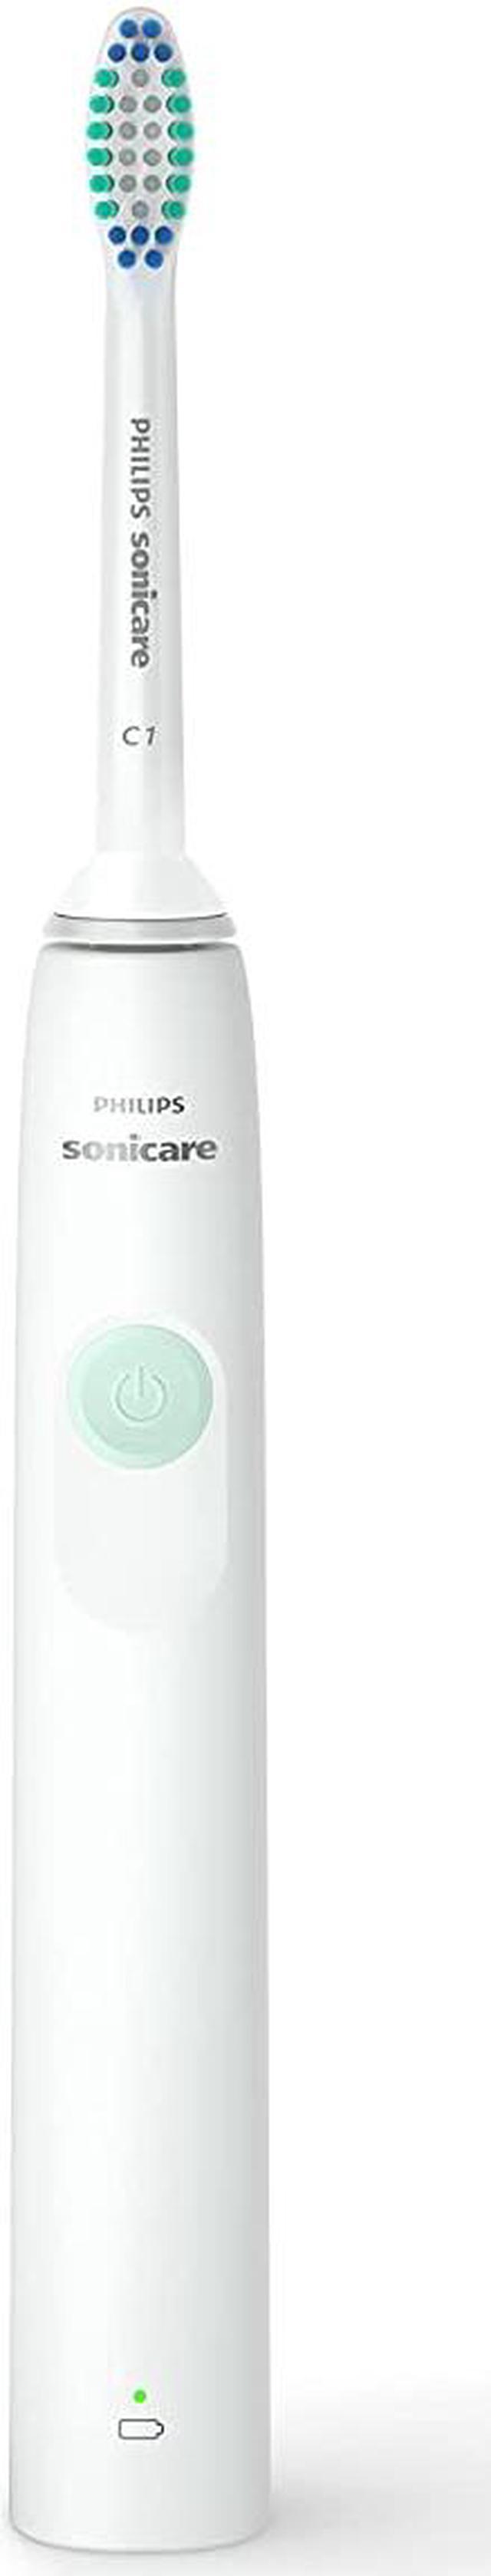 philips sonicare 2100 electric toothbrush